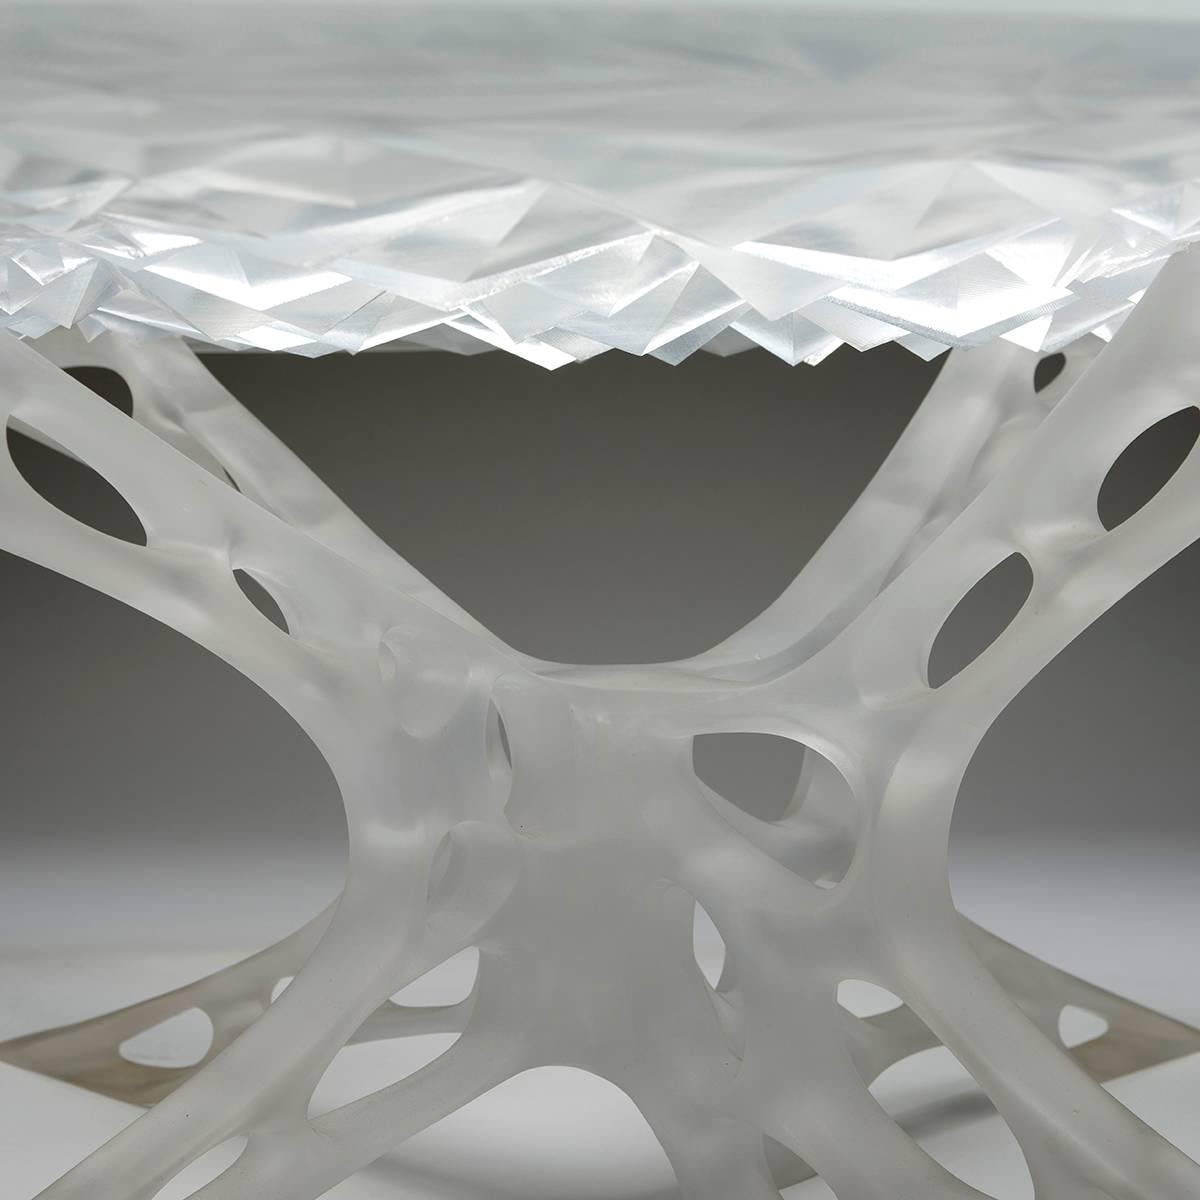 Chimeric Table is fabricated out of acrylic by John Shields.

John Shields is an architect and designer based in Philadelphia, Pennsylvania.
Point B utilizes the latest digital tools to enable simultaneous design and fabrication. By practicing